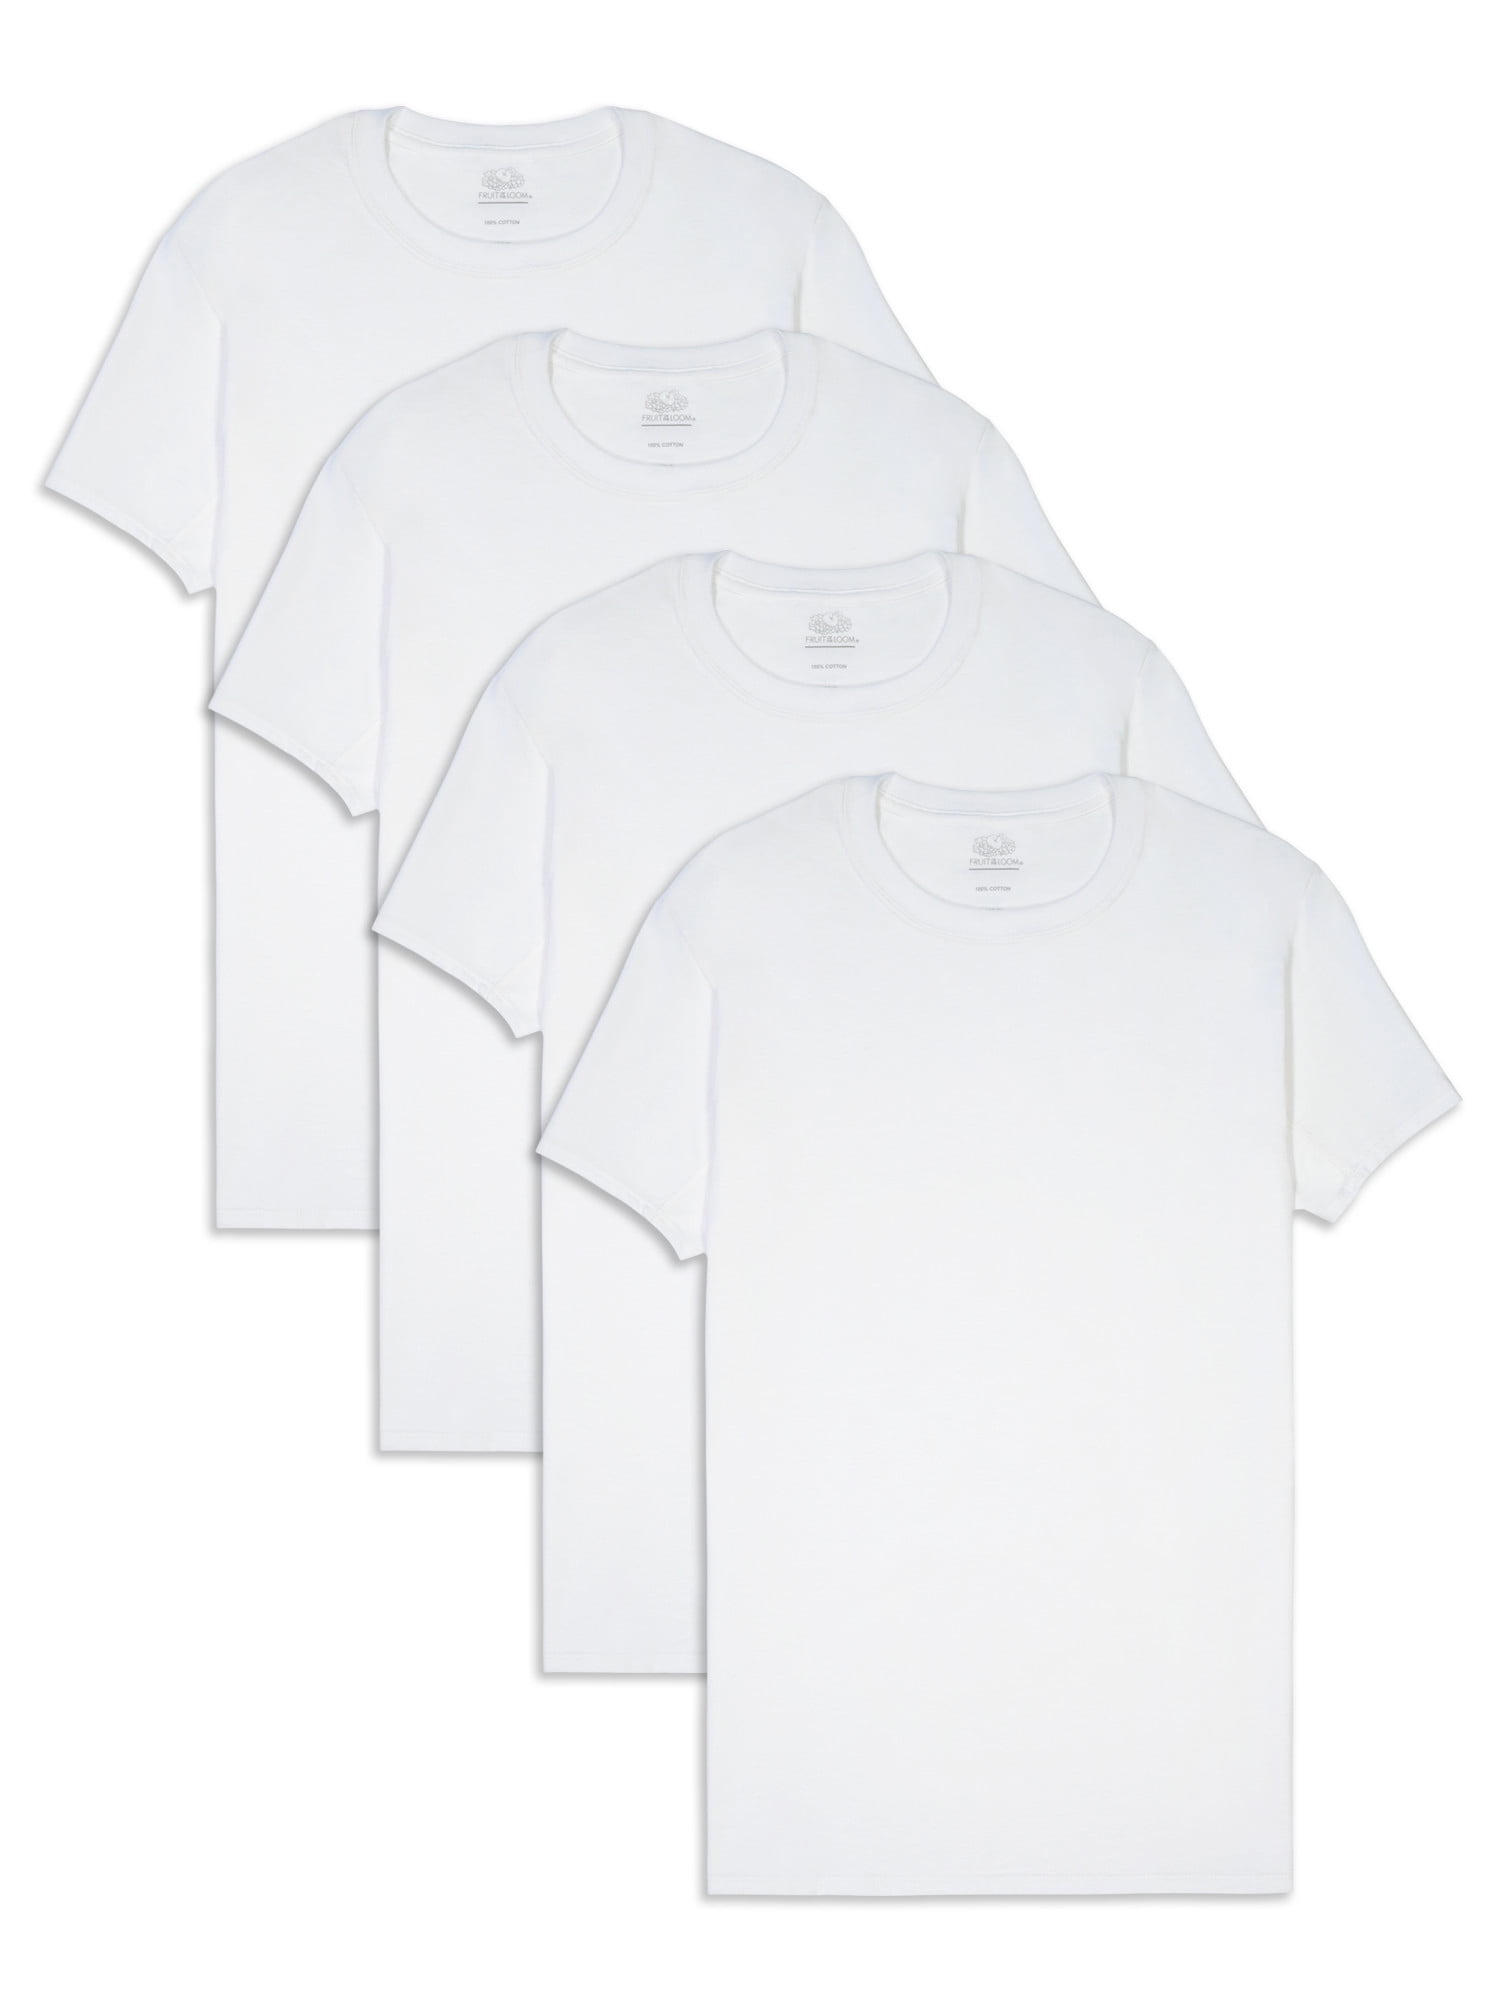 Fruit of the Loom Men's CoolZone White Crew T-Shirts, 4 Pack, Size 2XL ...